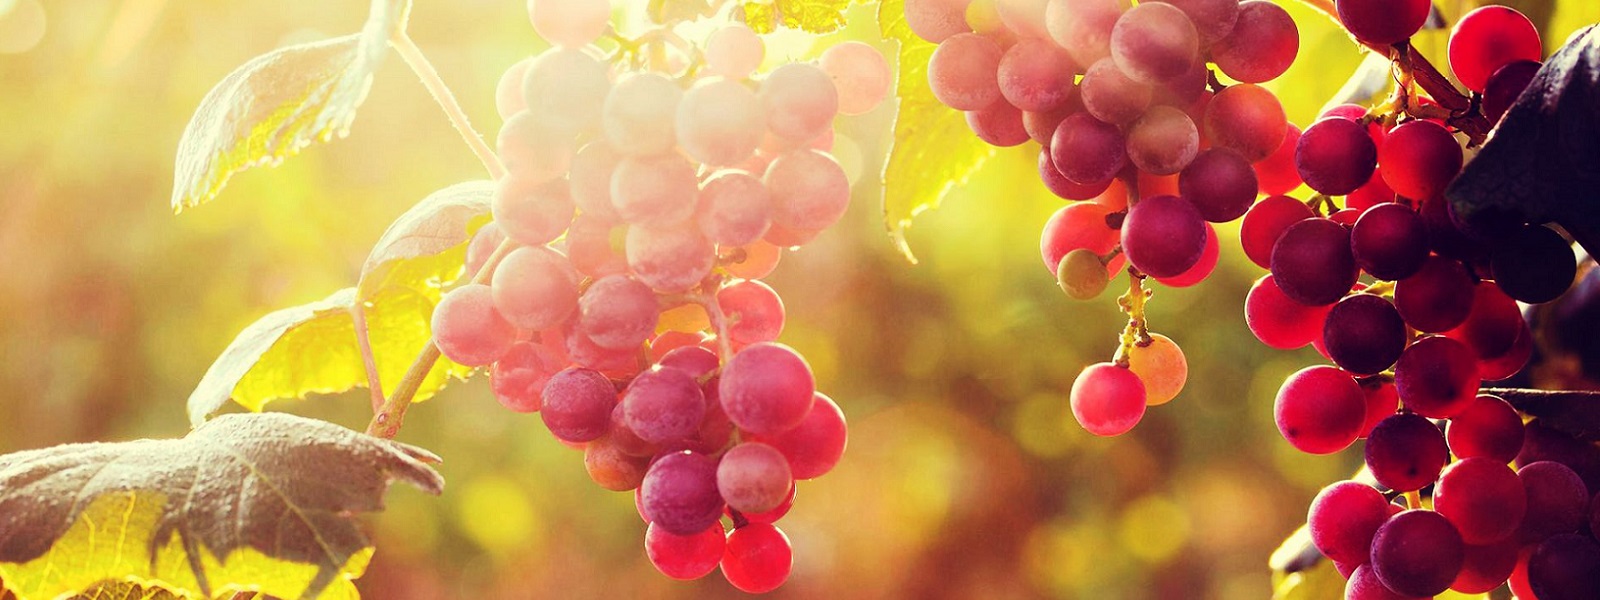 sun-with-grapes